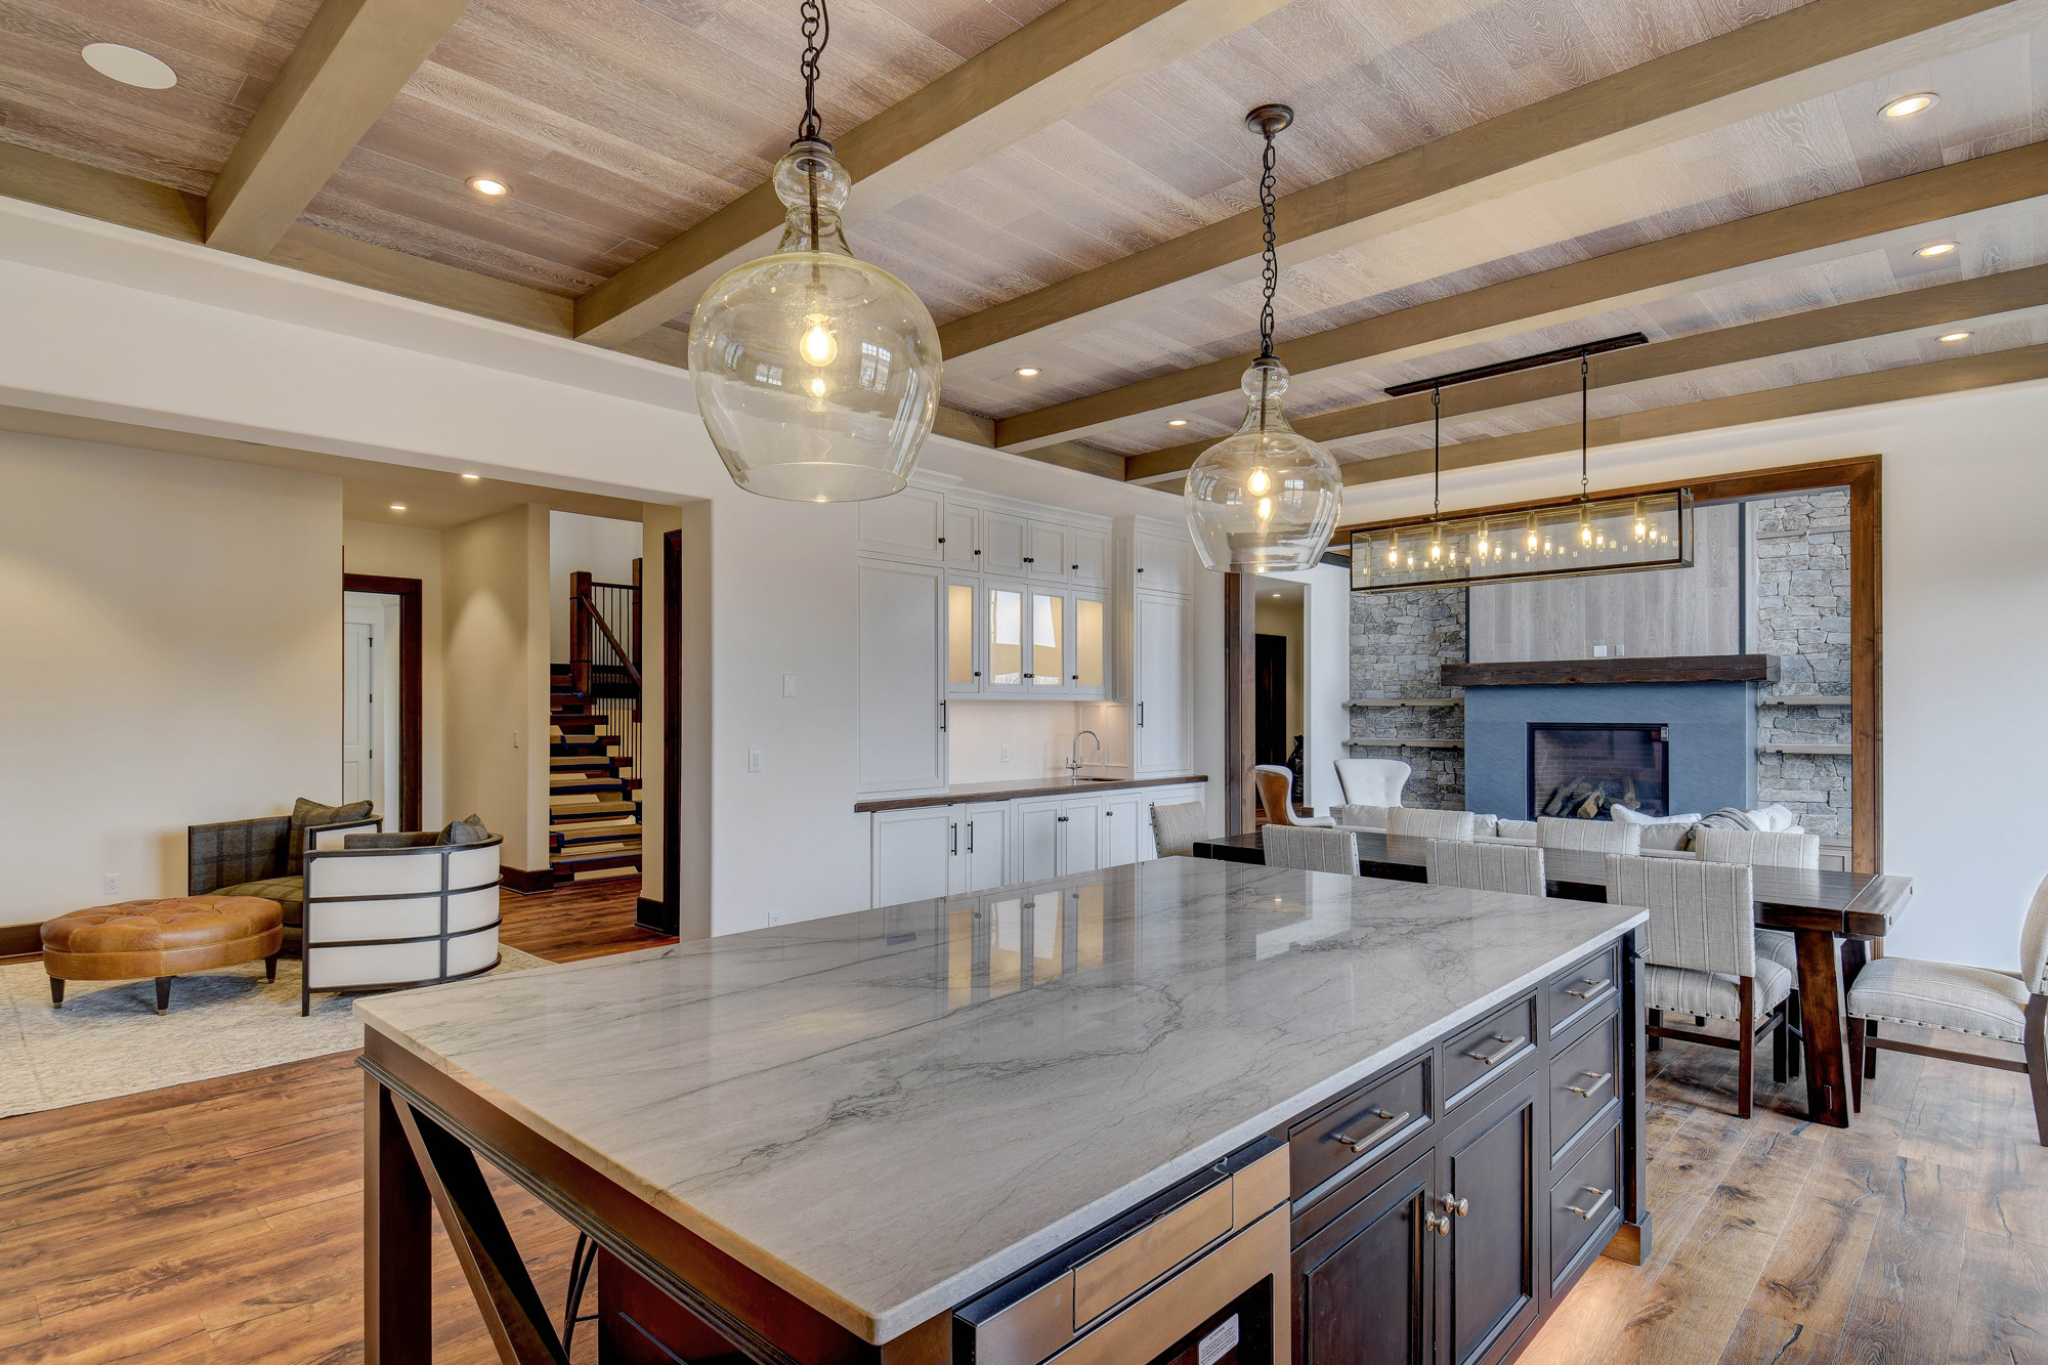 Spacious kitchen and dining area with high ceilings and modern fixtures, designed by a Luxury Custom Home Builder